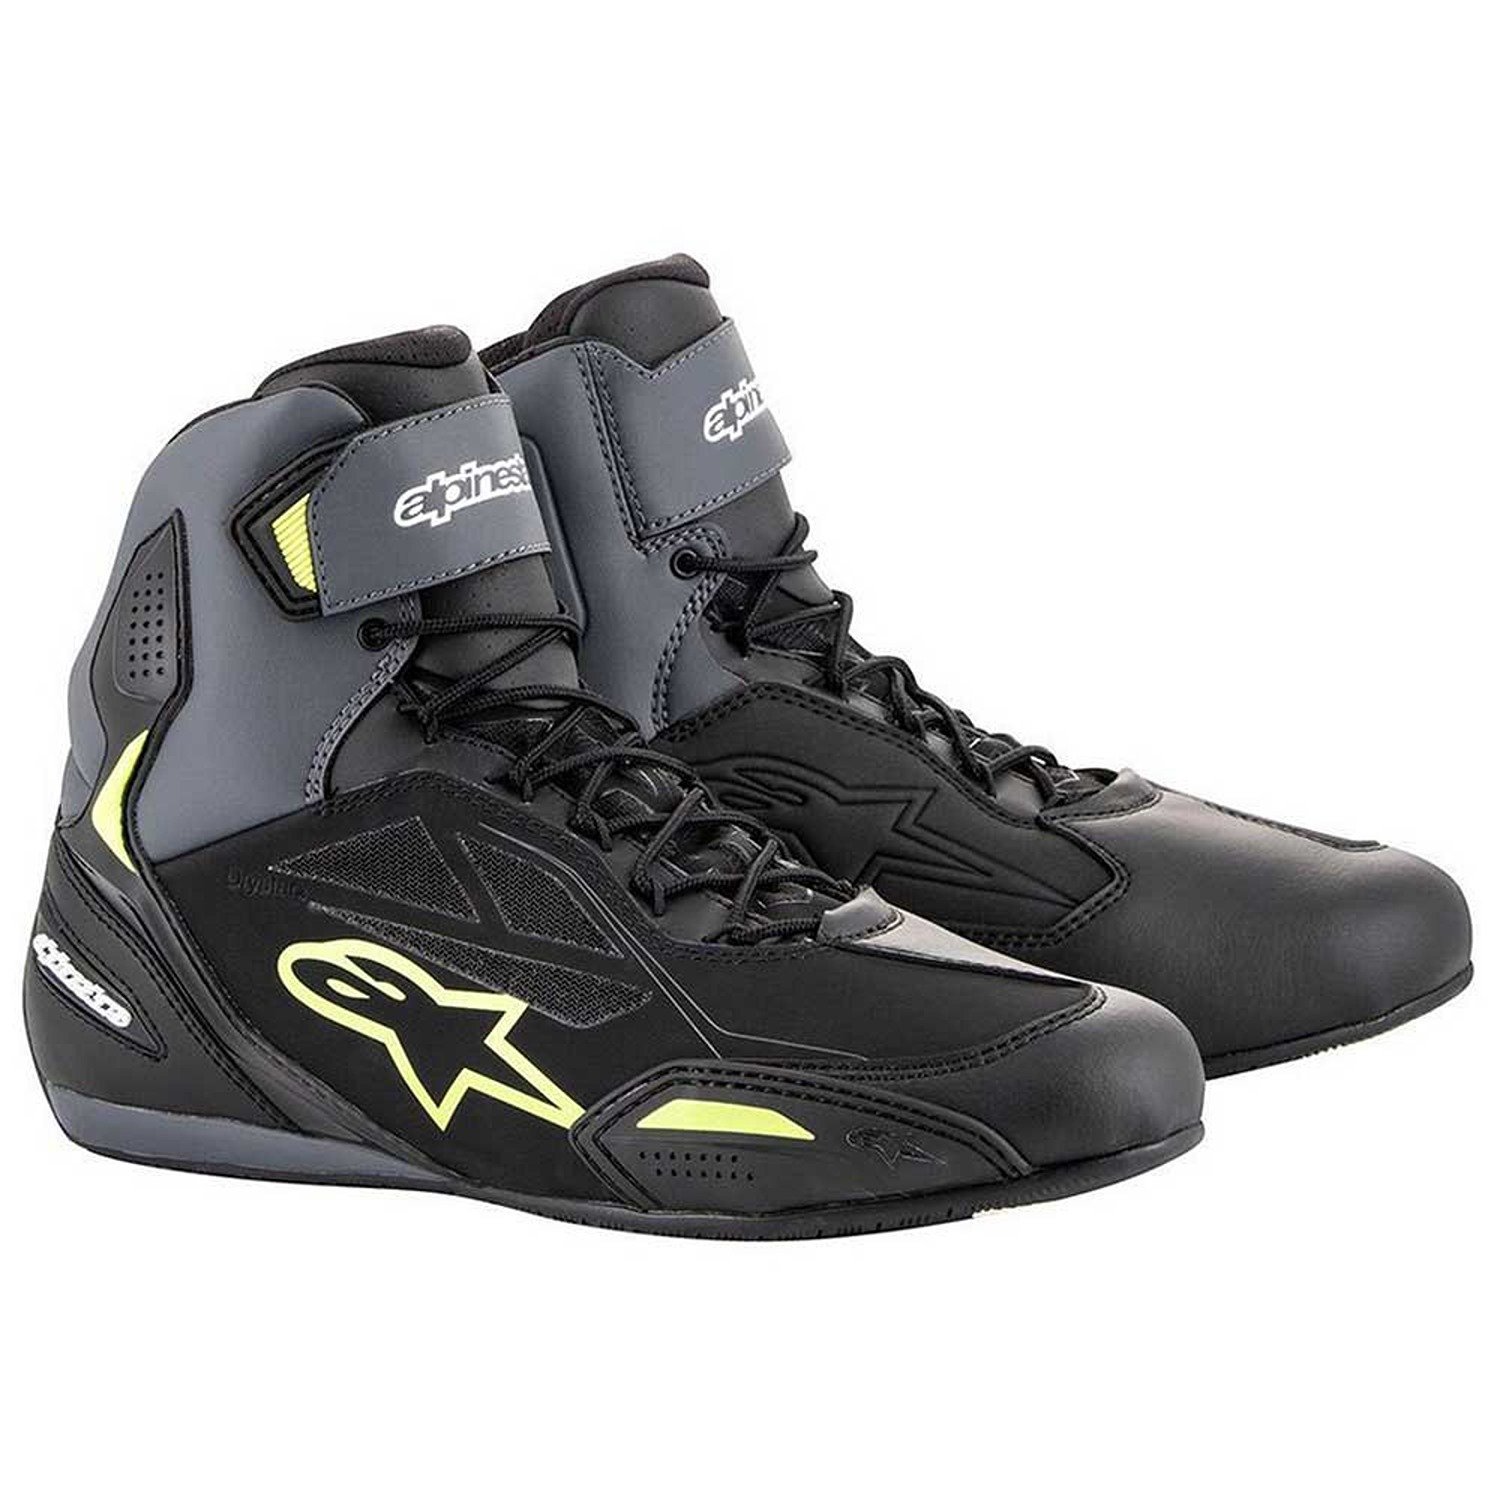 Image of Alpinestars Faster-3 Shoes Black Yellow Fluo Size US 13 EN